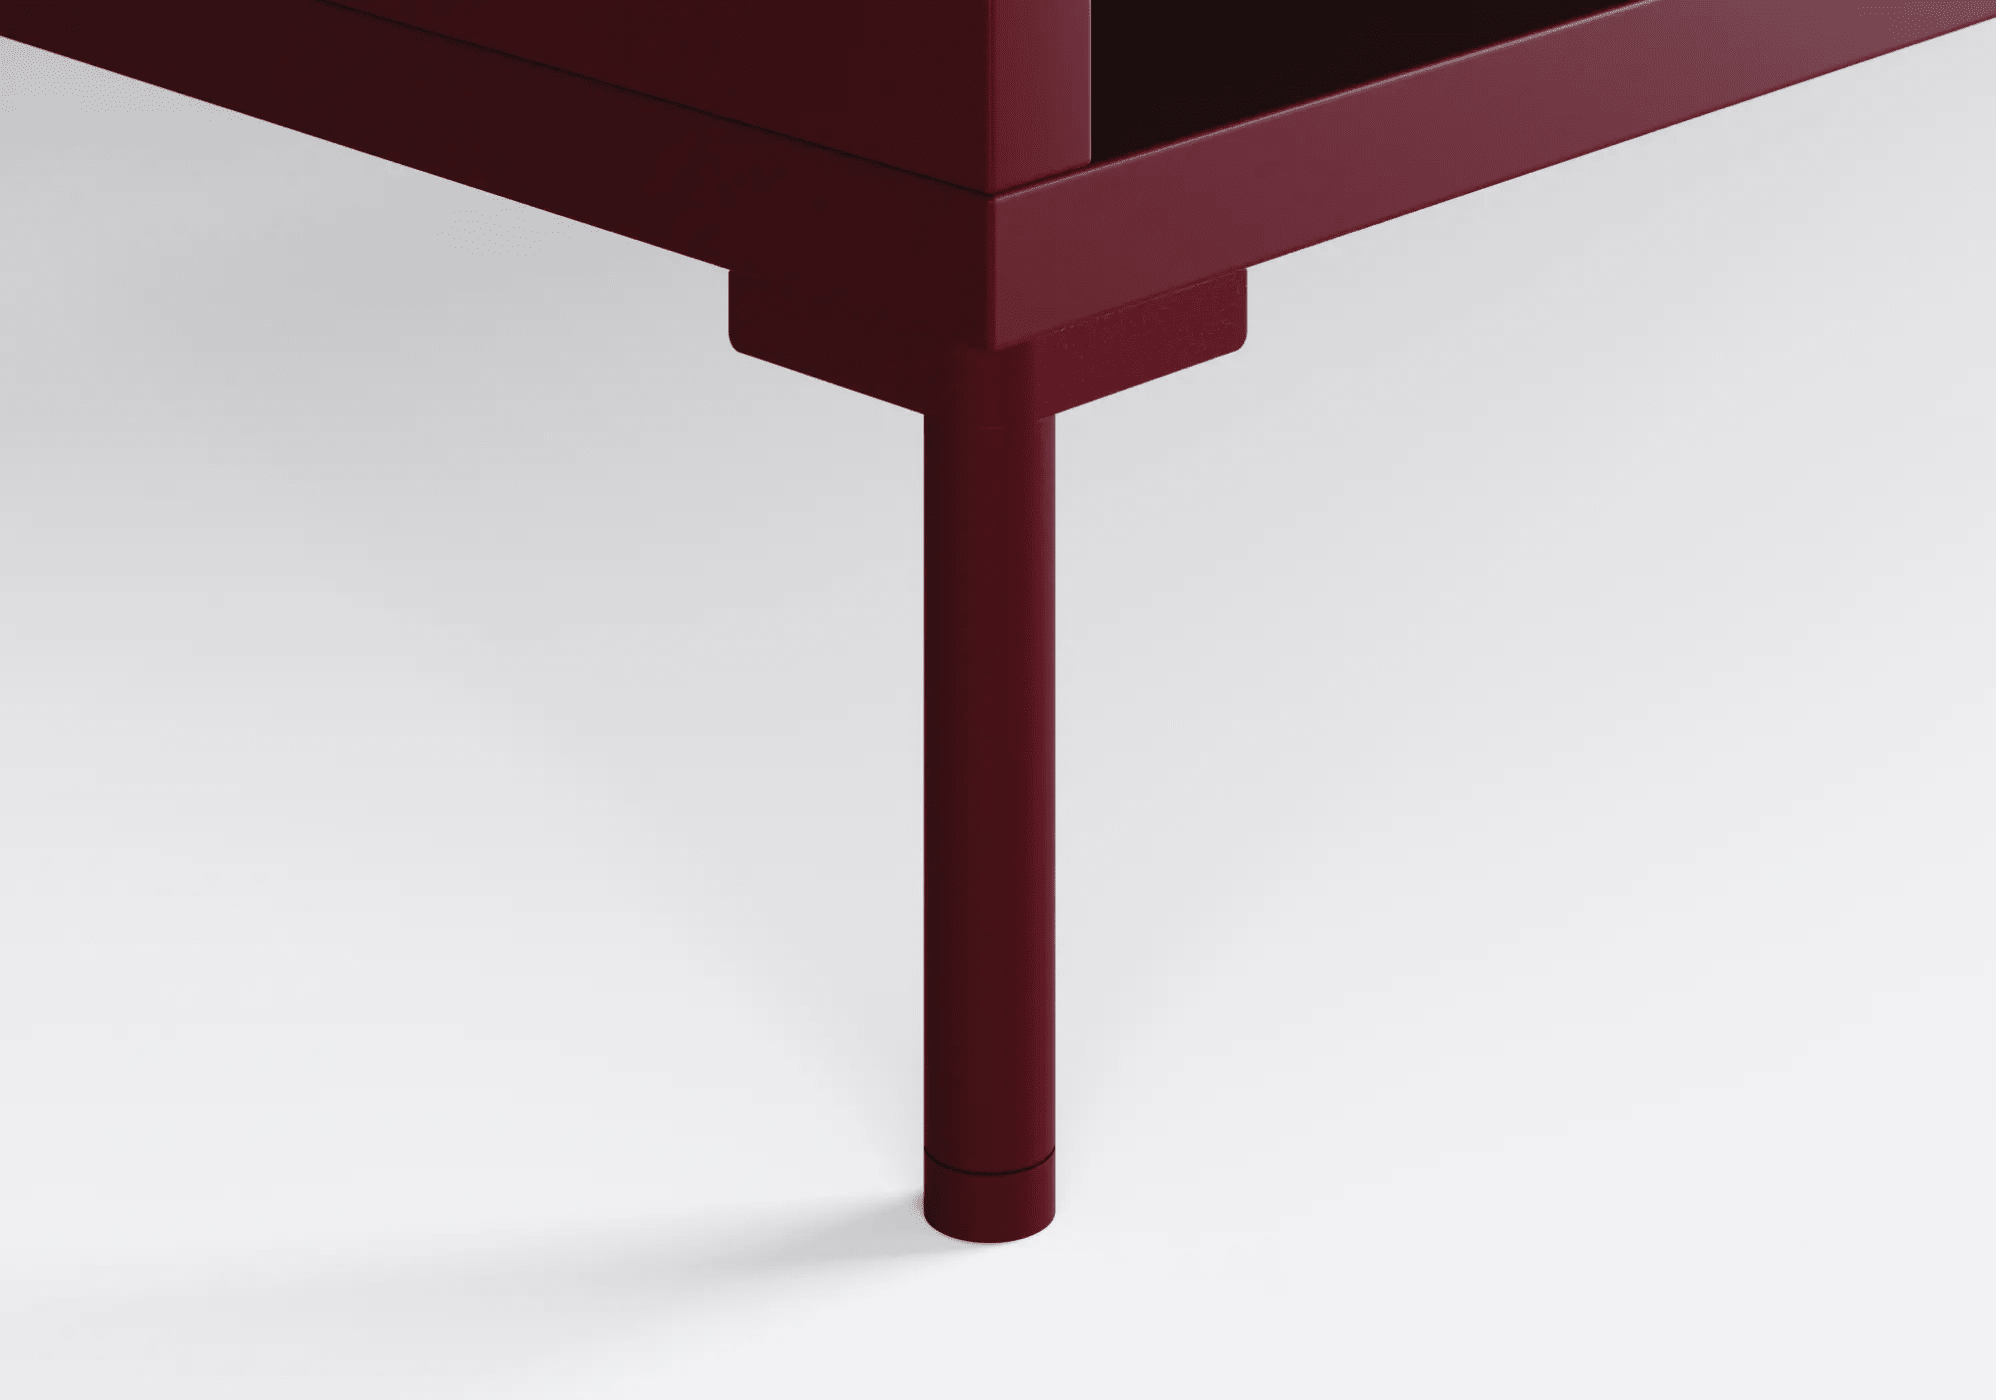 Large Burgundy Red Shoe Rack with Doors, Drawers, Backpanels and Cable Management - 240x93x32cm 8